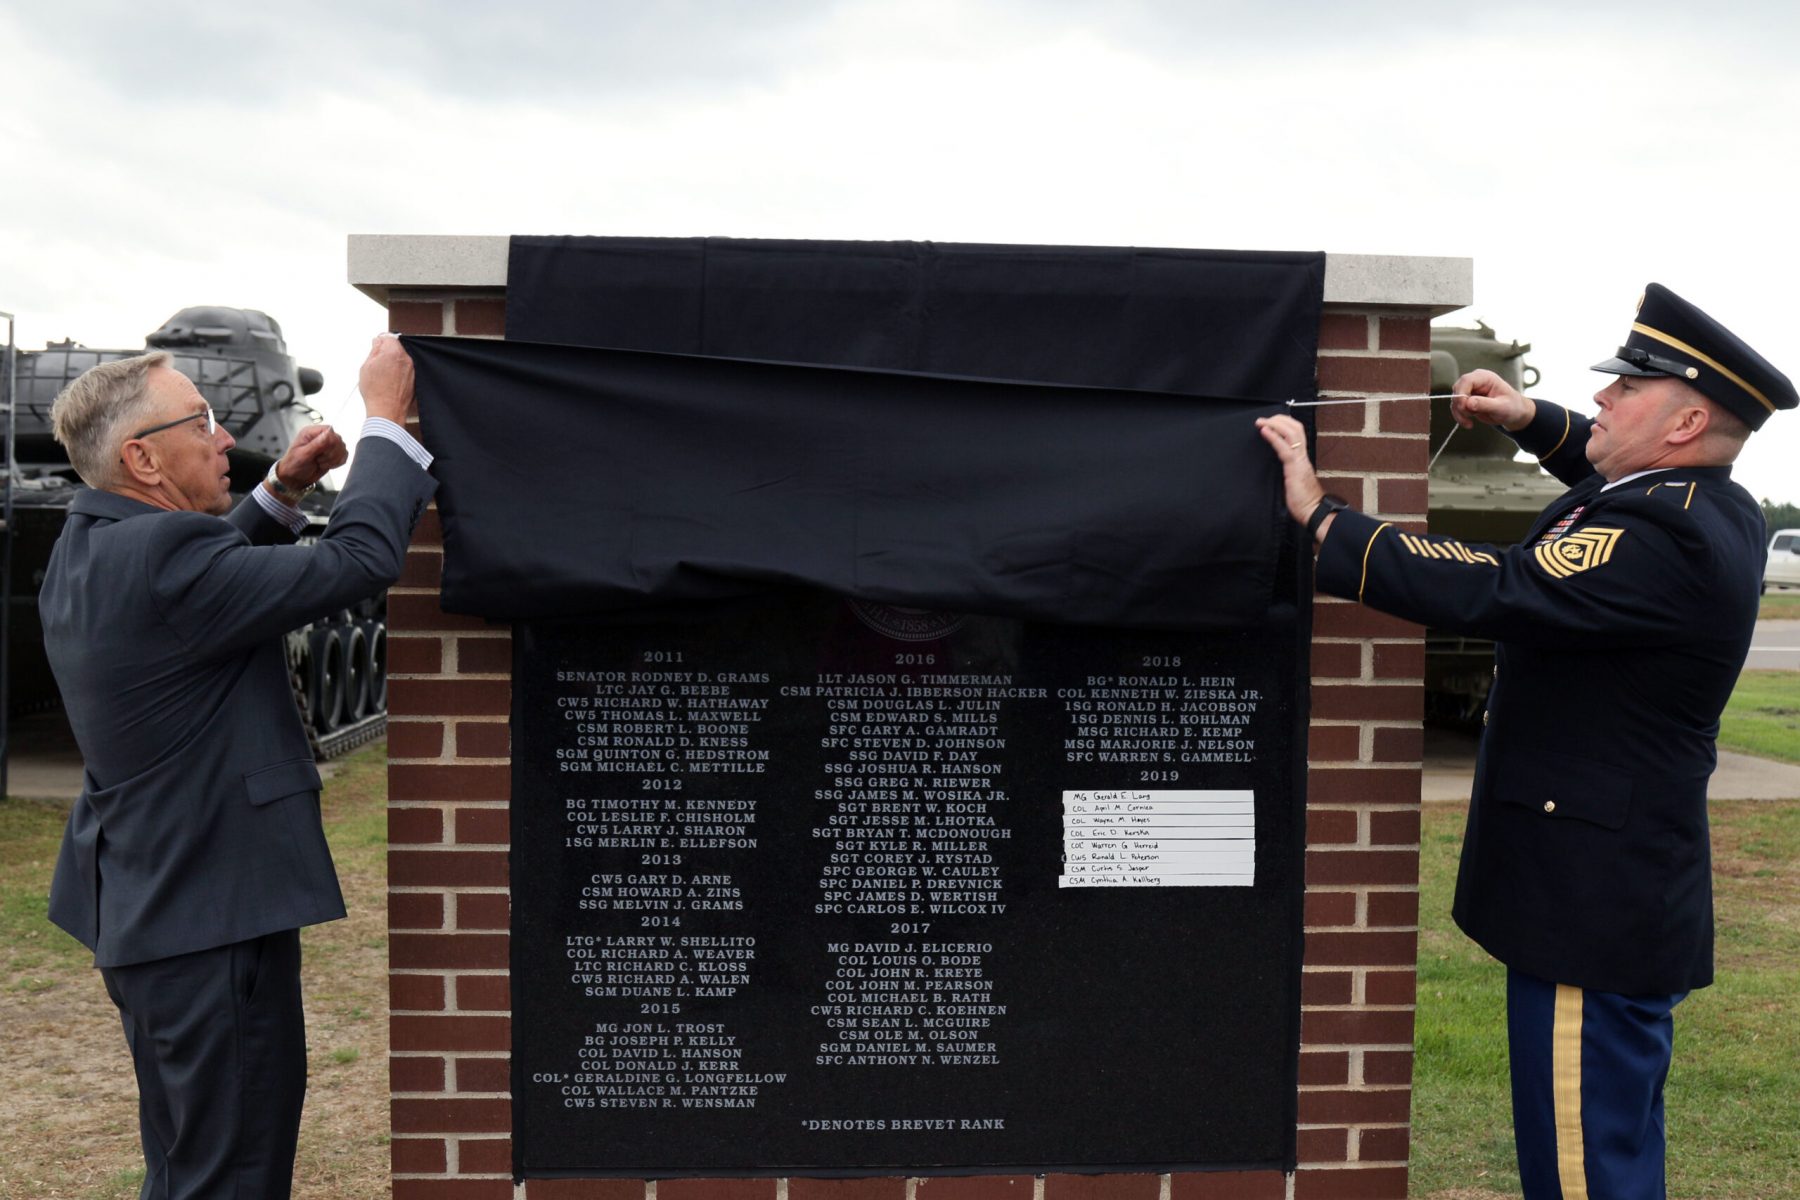 Maj. Gen. (Ret.) Elandson, Court of Honor board member, and Command Sergeant Major Erickson unviel the Court of Honor monument near the Military Museum on Camp Ripley on October 6th, 2019